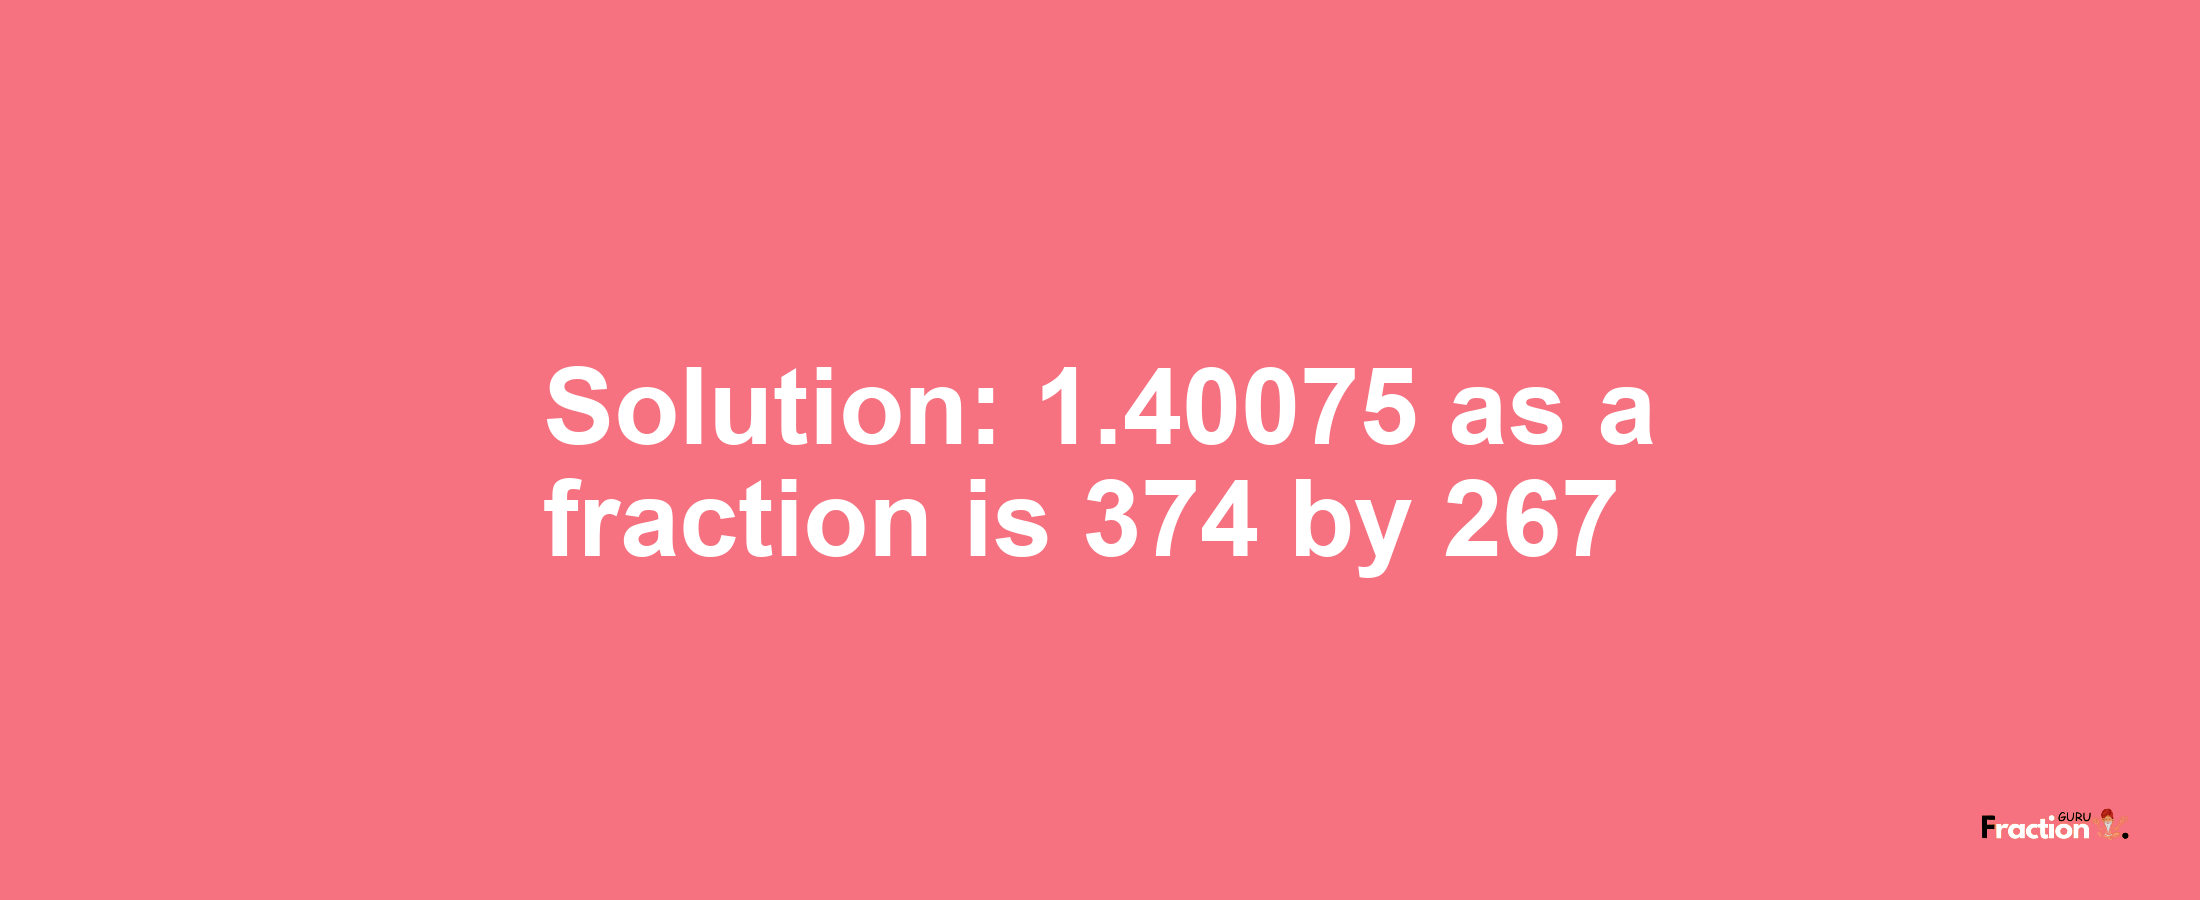 Solution:1.40075 as a fraction is 374/267